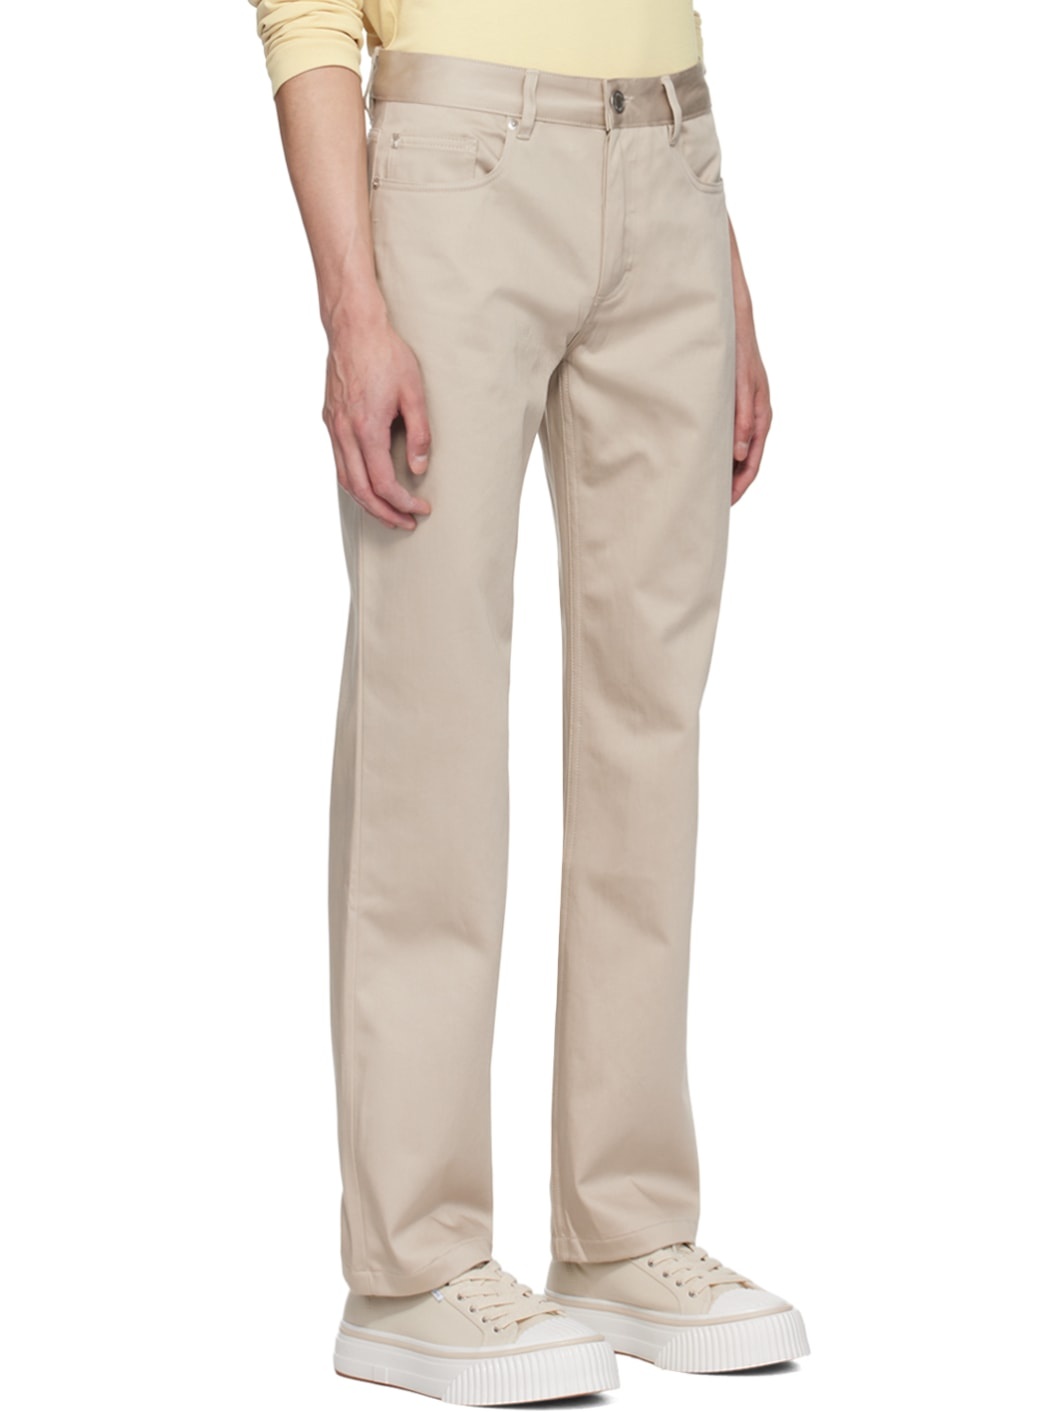 Beige Straight Fit Trousers - 2